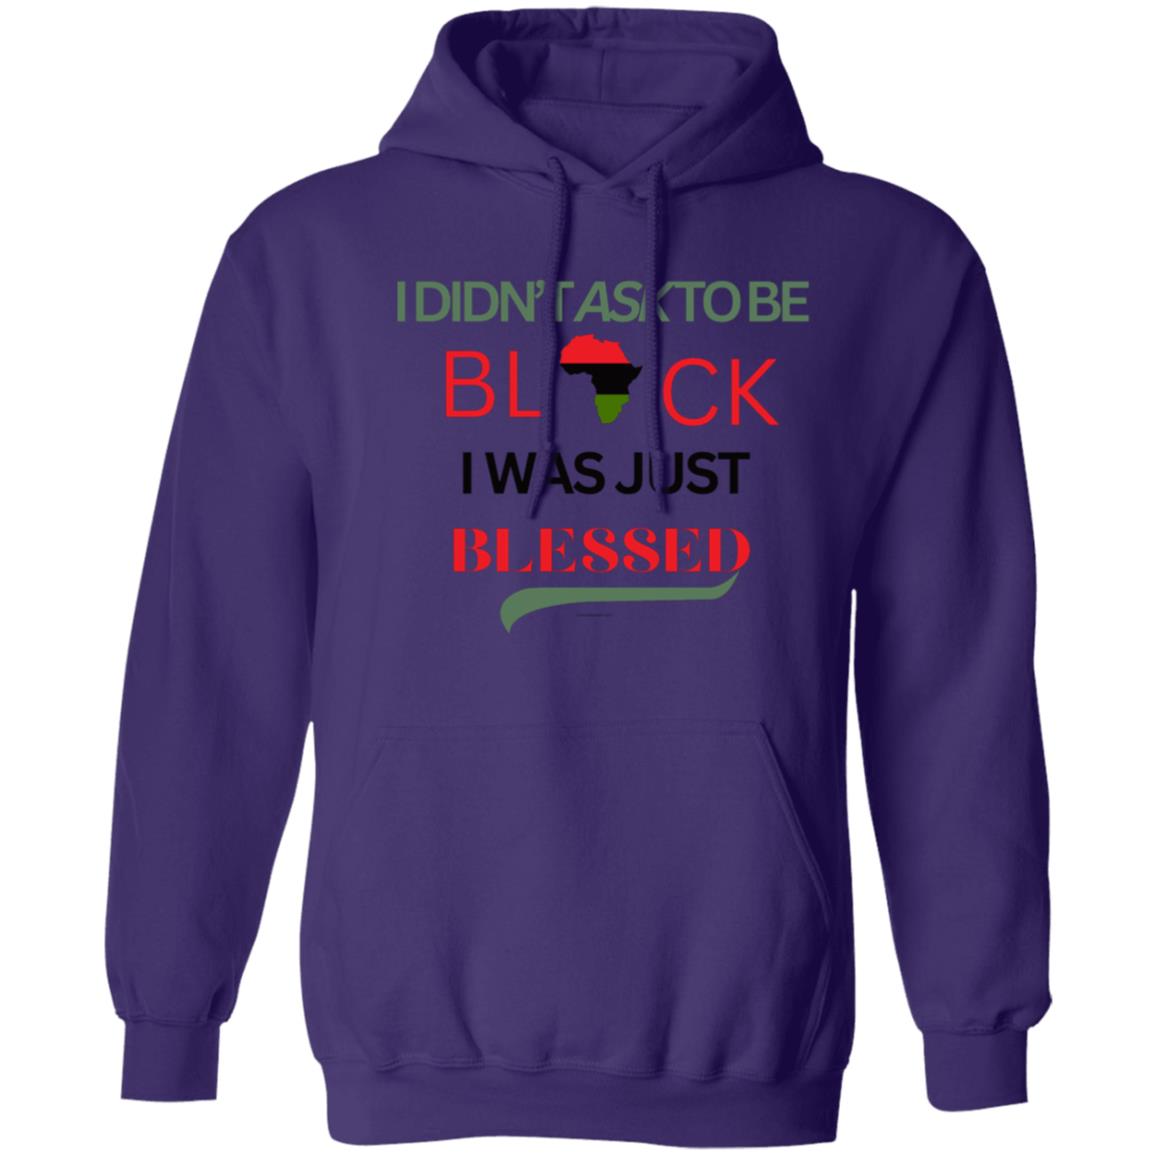 I DIDNT ASK TO BE BLACK...(UNISEX) Pullover Hoodie